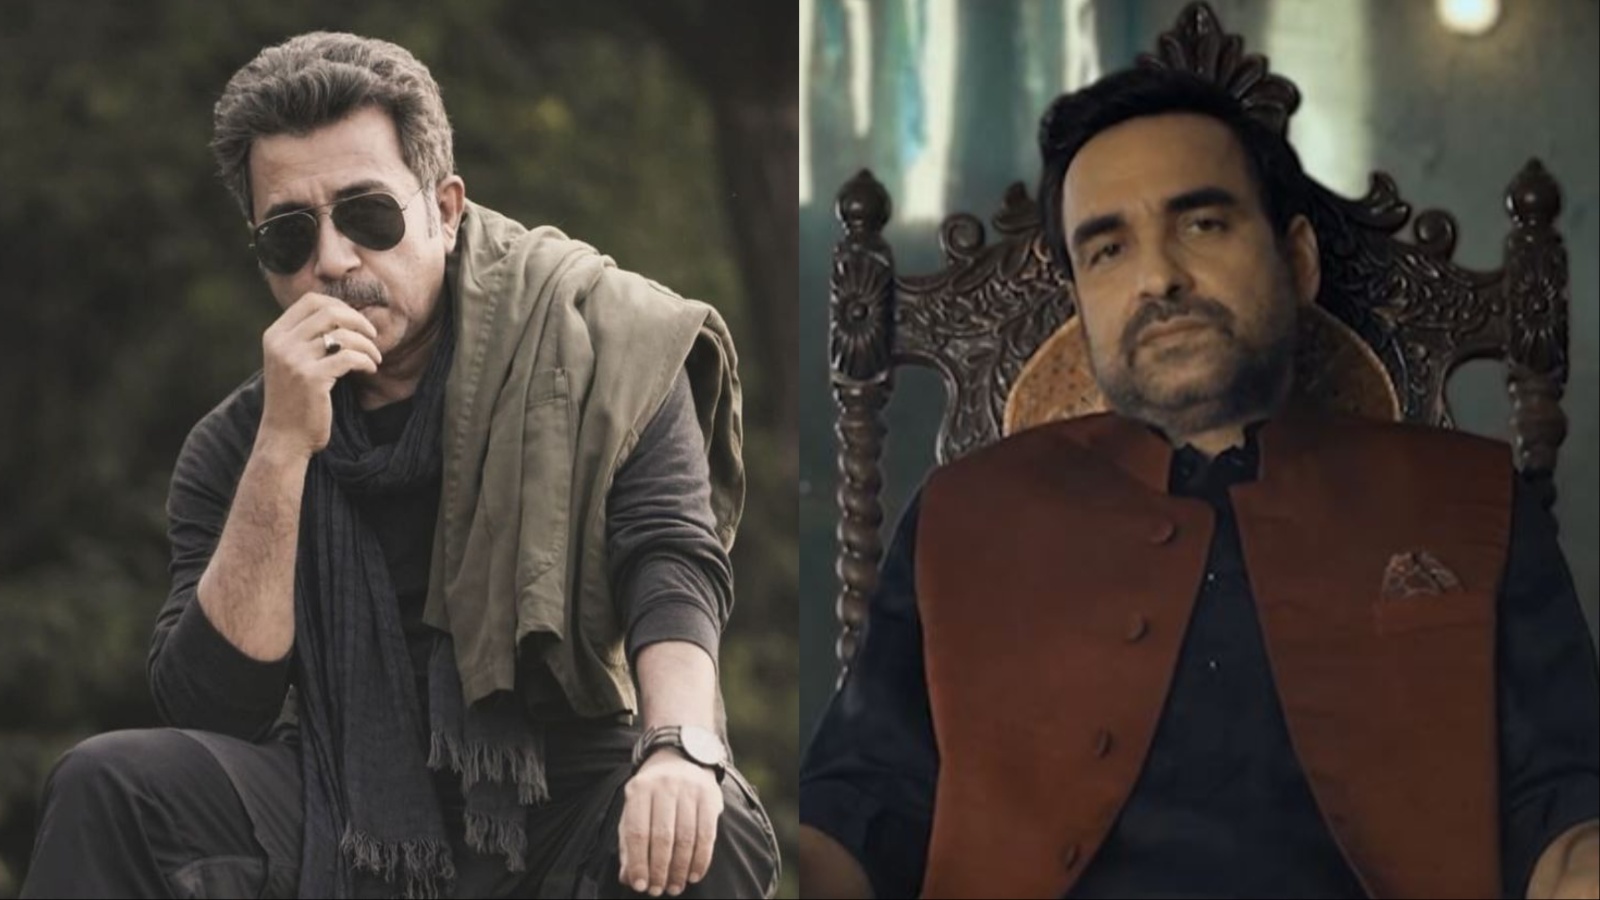 Pankaj Tripathi reacts to Pankaj Jha accusing him of glamorising wrestling, calls his comments noise he doesn't pay attention to | Bollywood News